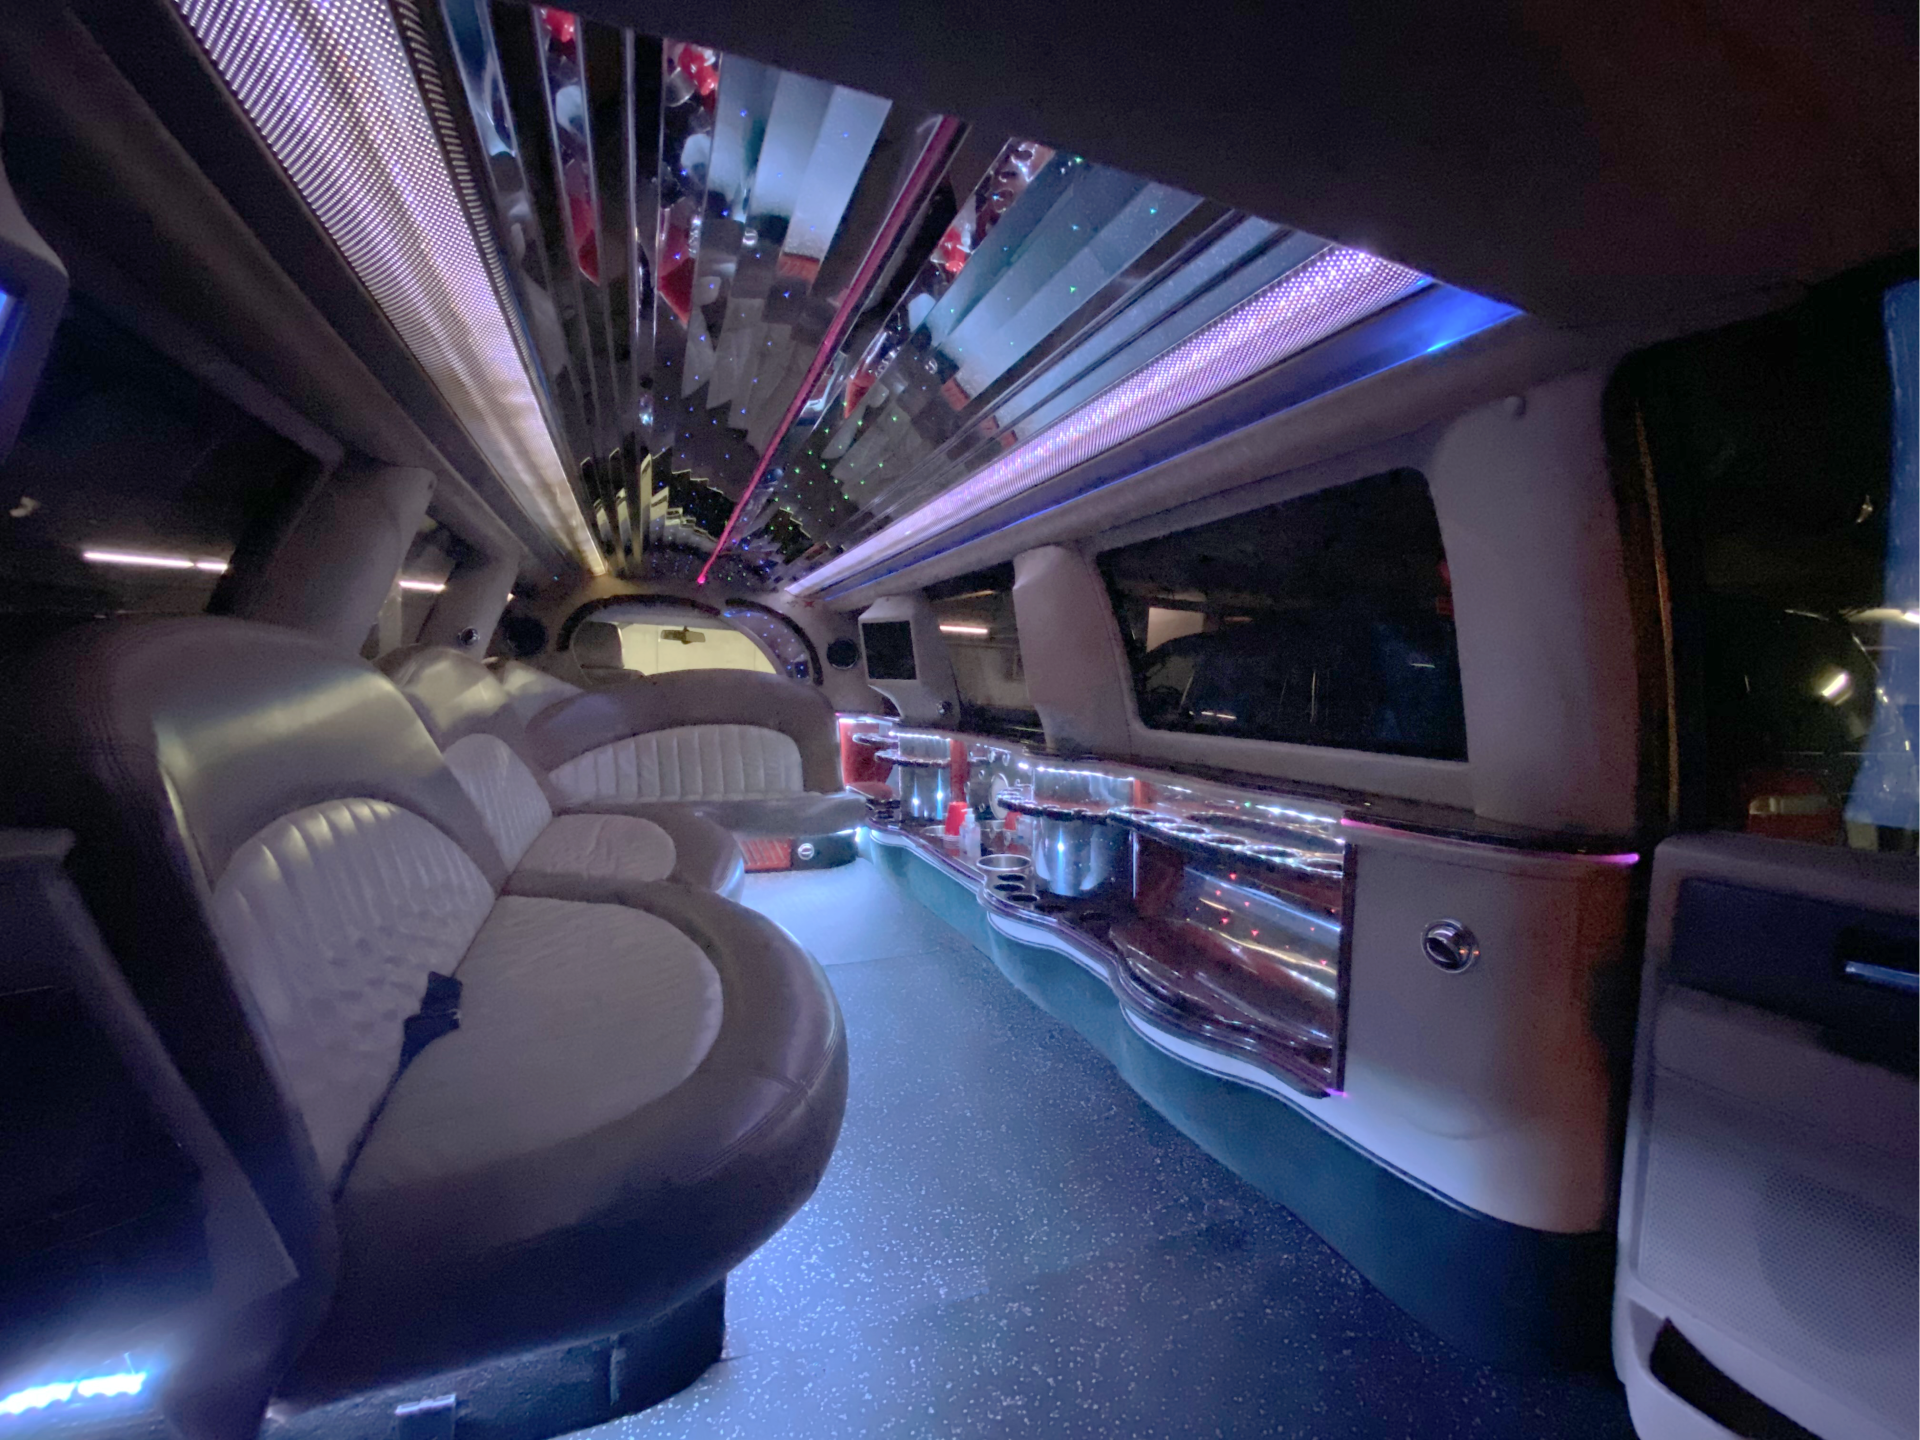 2007 expedition interior front facing view with LED backlighting, seating and full length bar